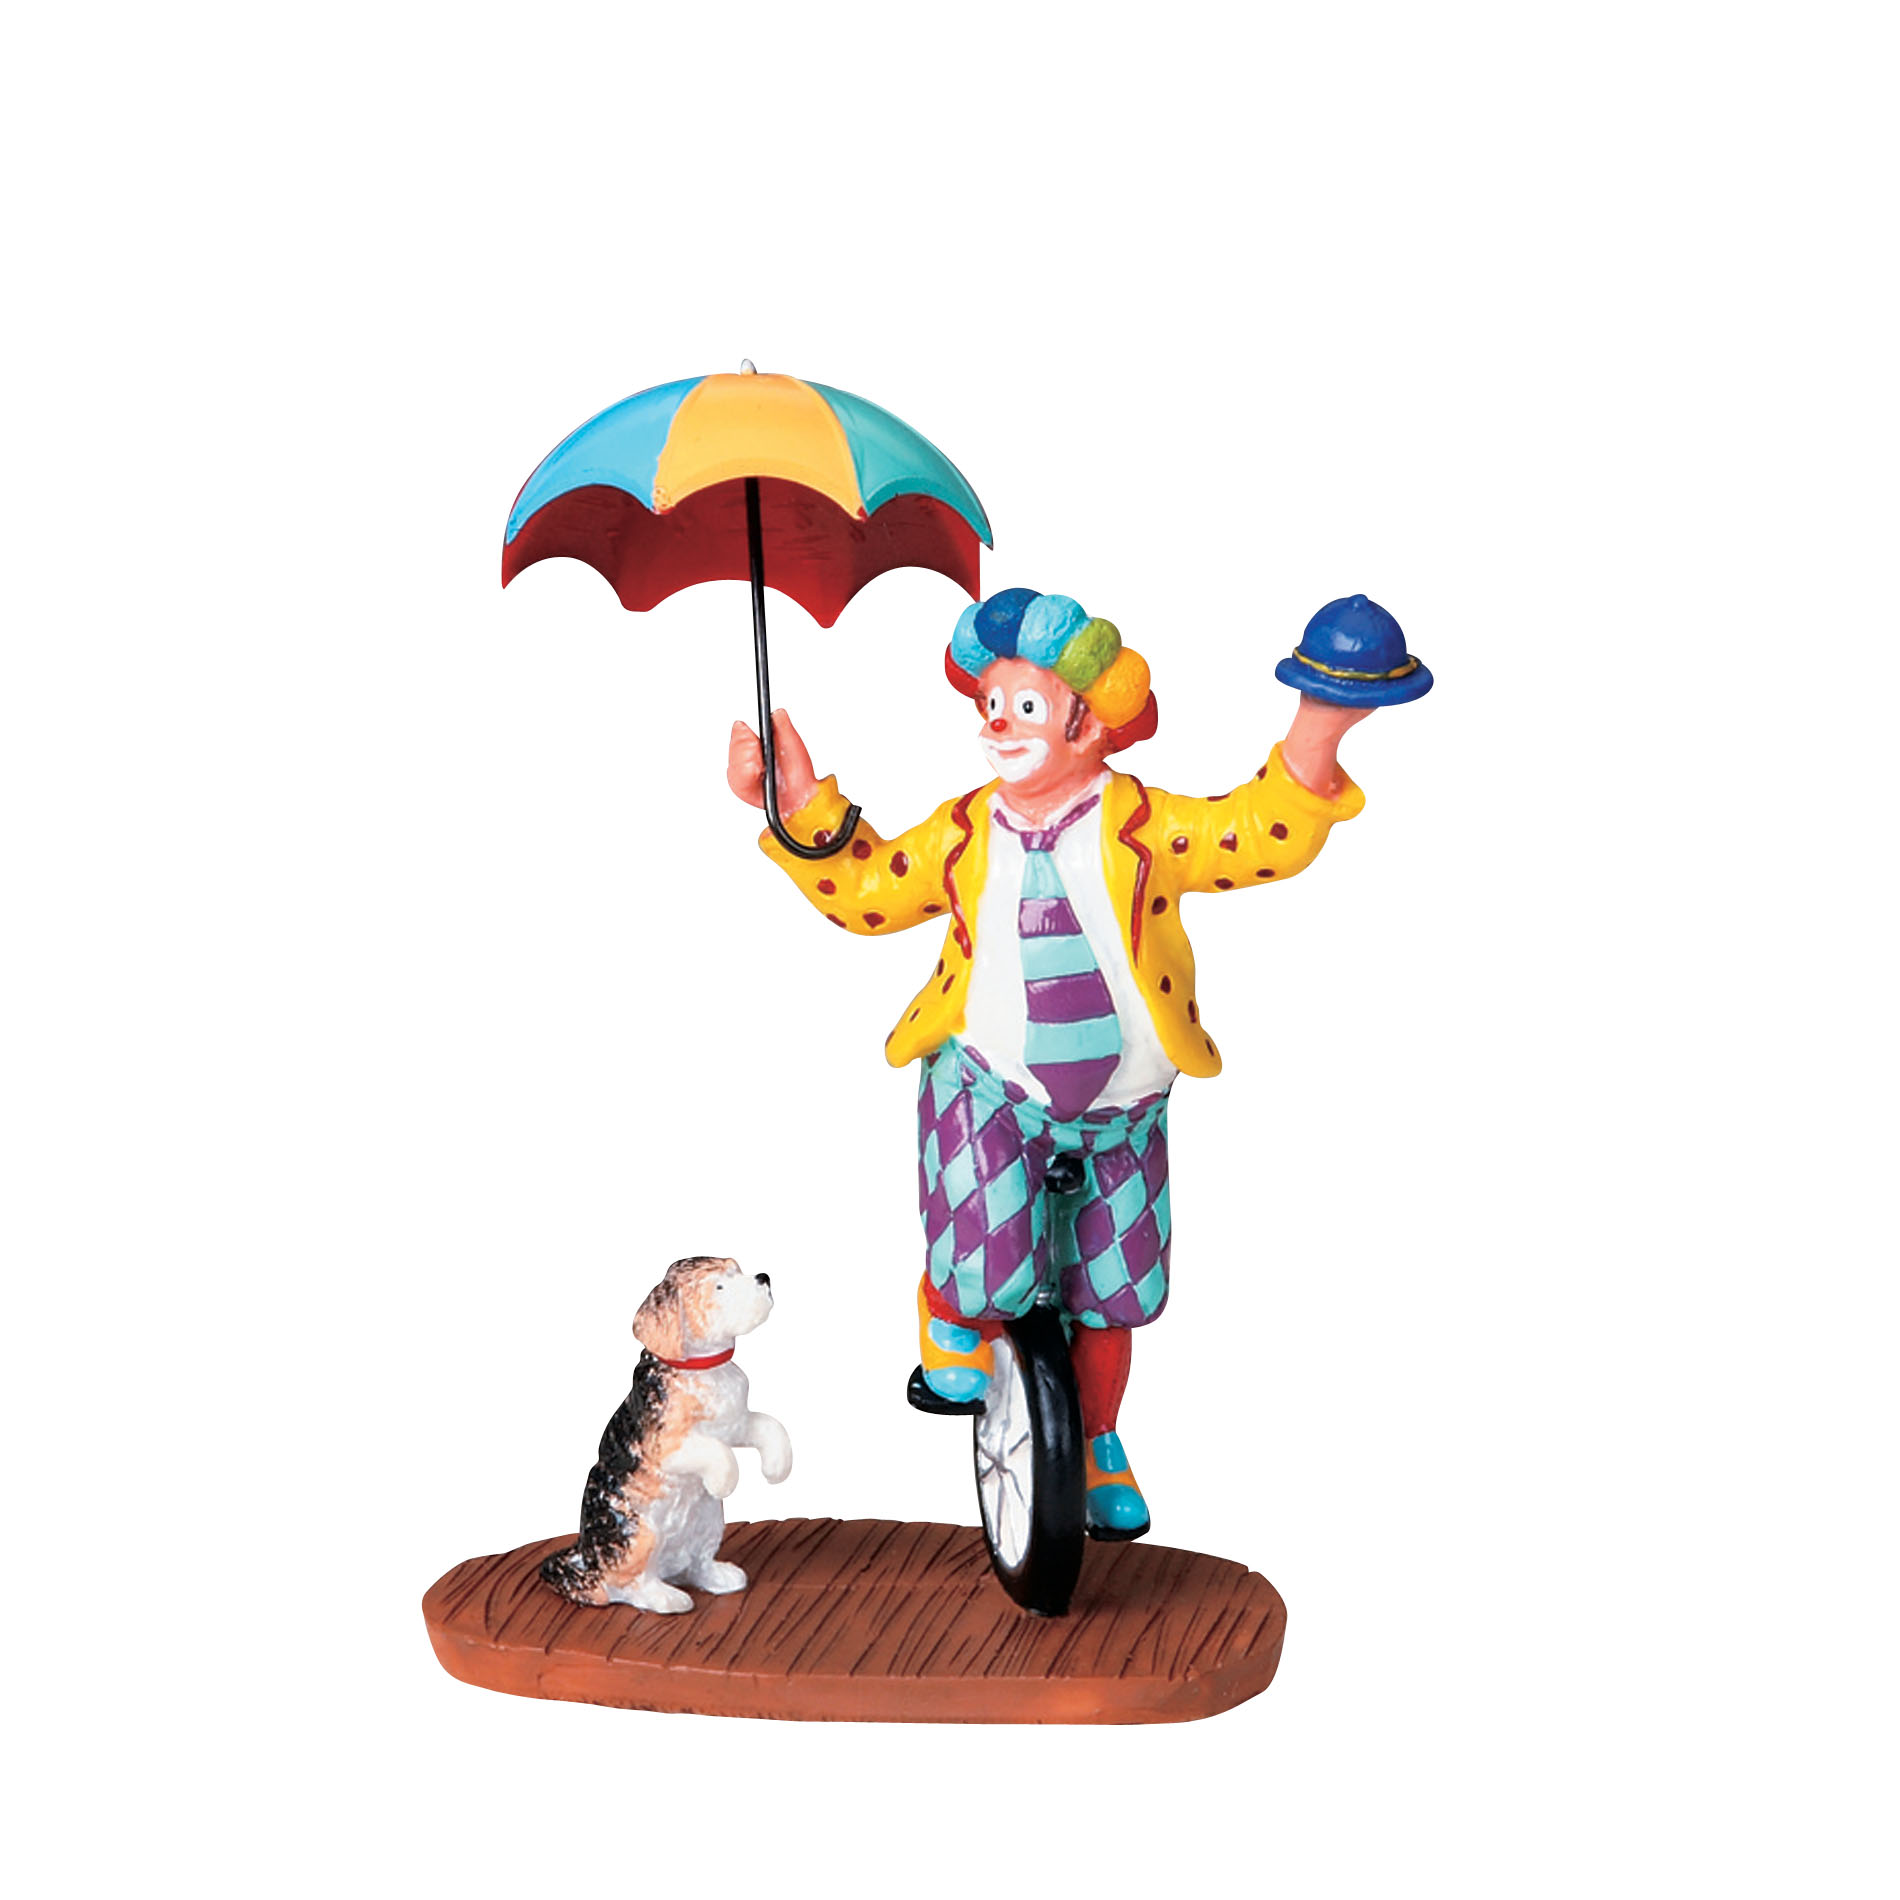 Lemax Village Collection Carnival Village Figurine, Unicycle Clown